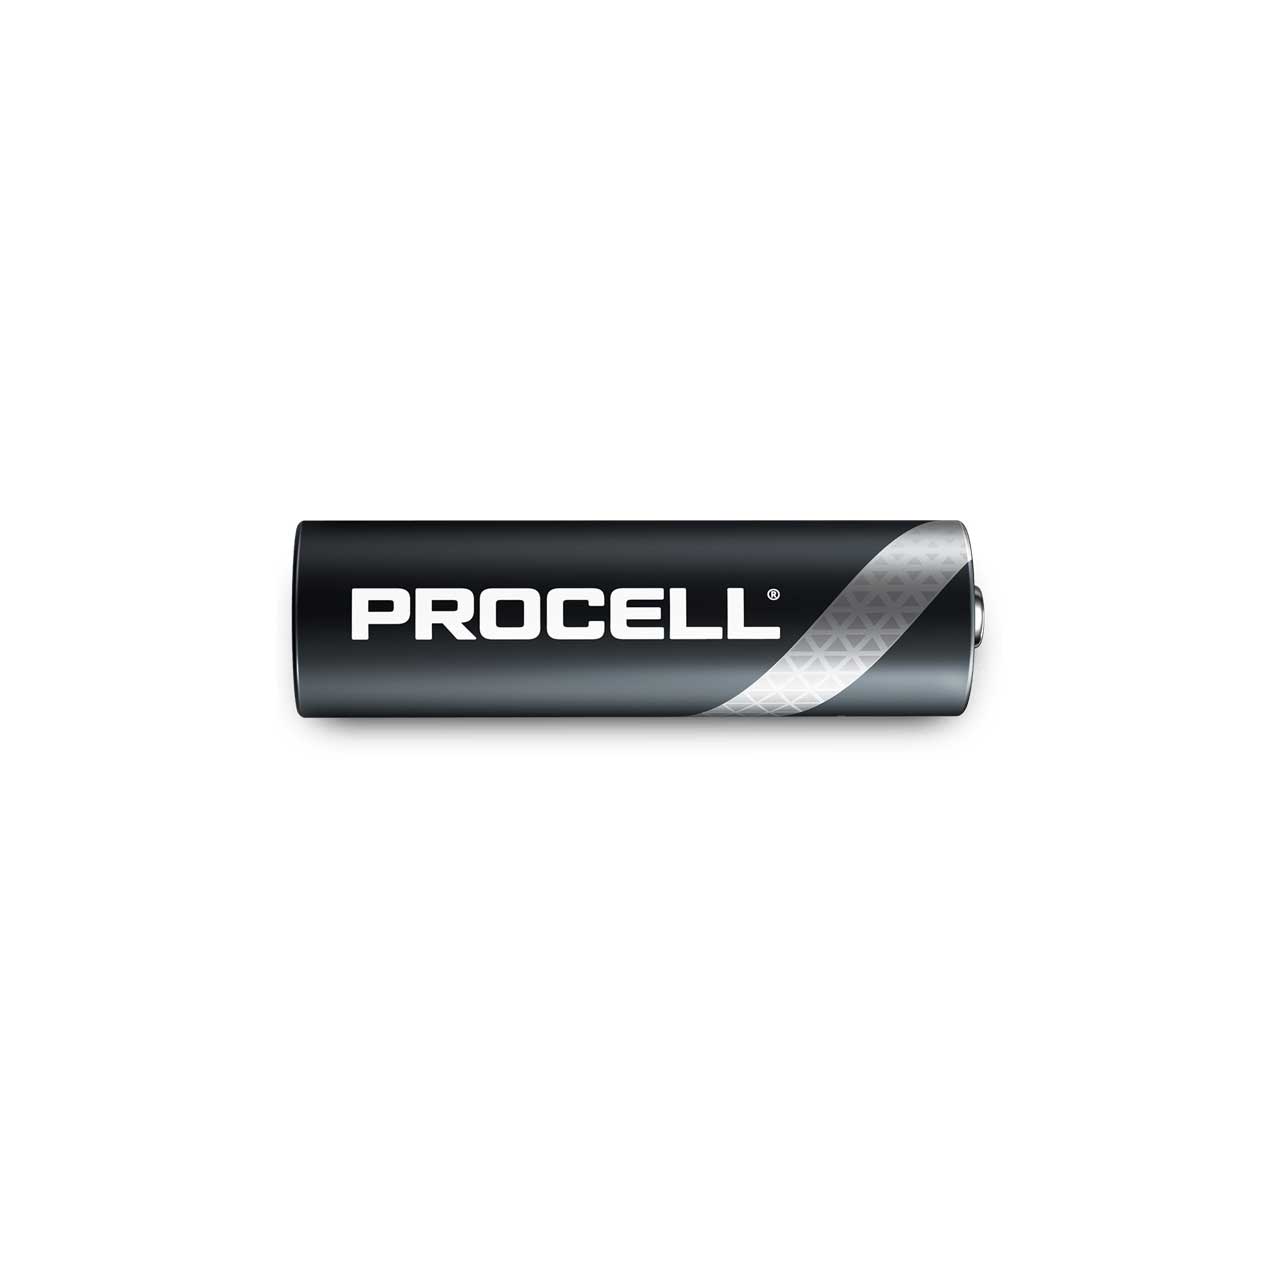 Duracell PC1500 ProCell Heavy Duty AA Batteries - 24 Pack